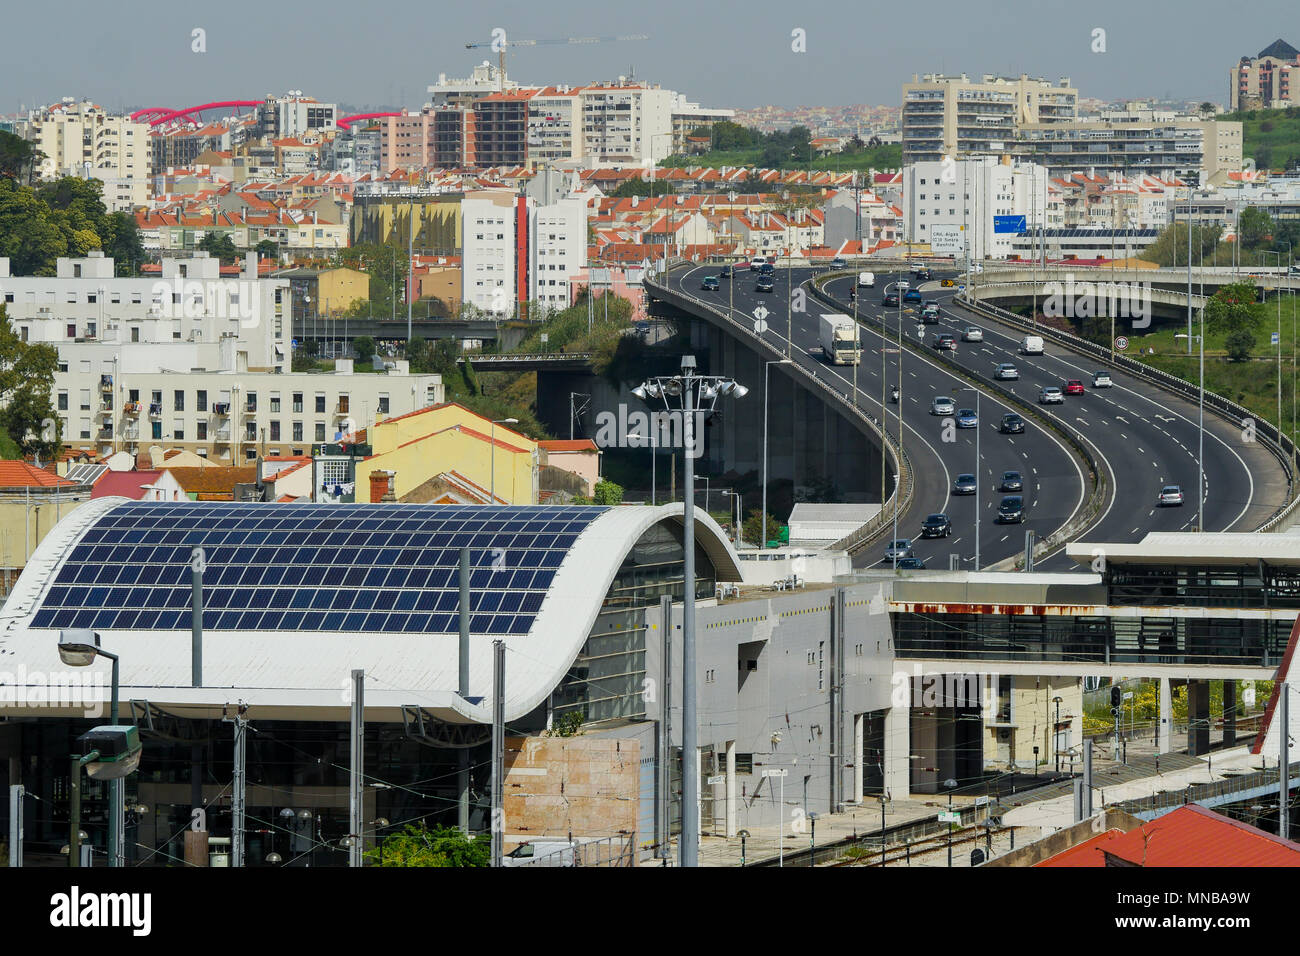 General view of the modern buidings area surrounding Sete Rios raiilway station, Lisbon, Portugal Stock Photo